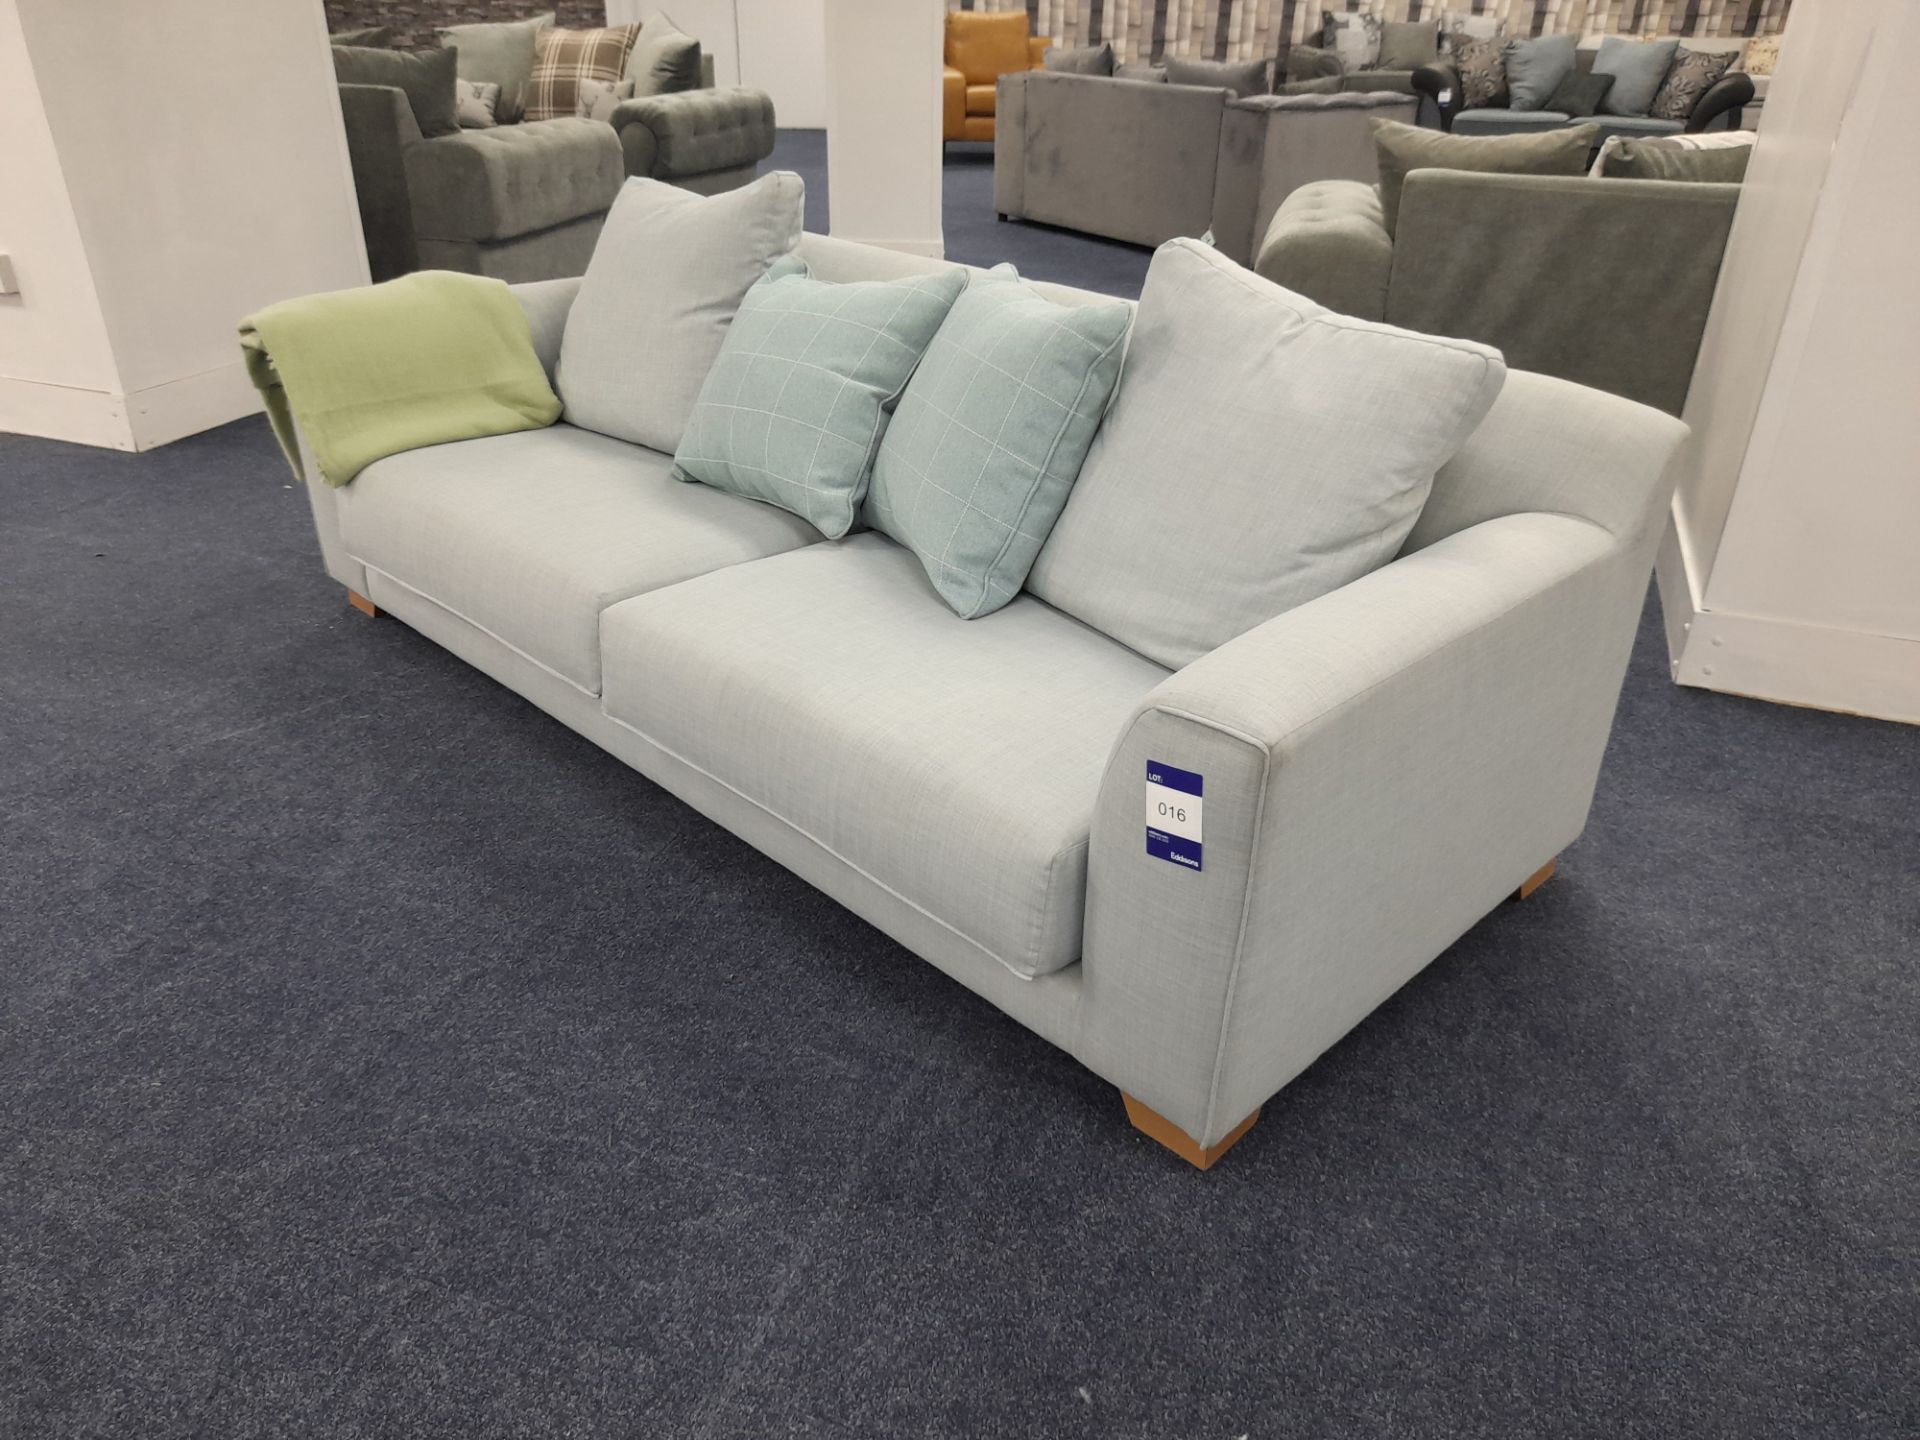 John Lewis pale blue fabric upholstered, 4 seater sofa (Ex-Display) - Image 3 of 8